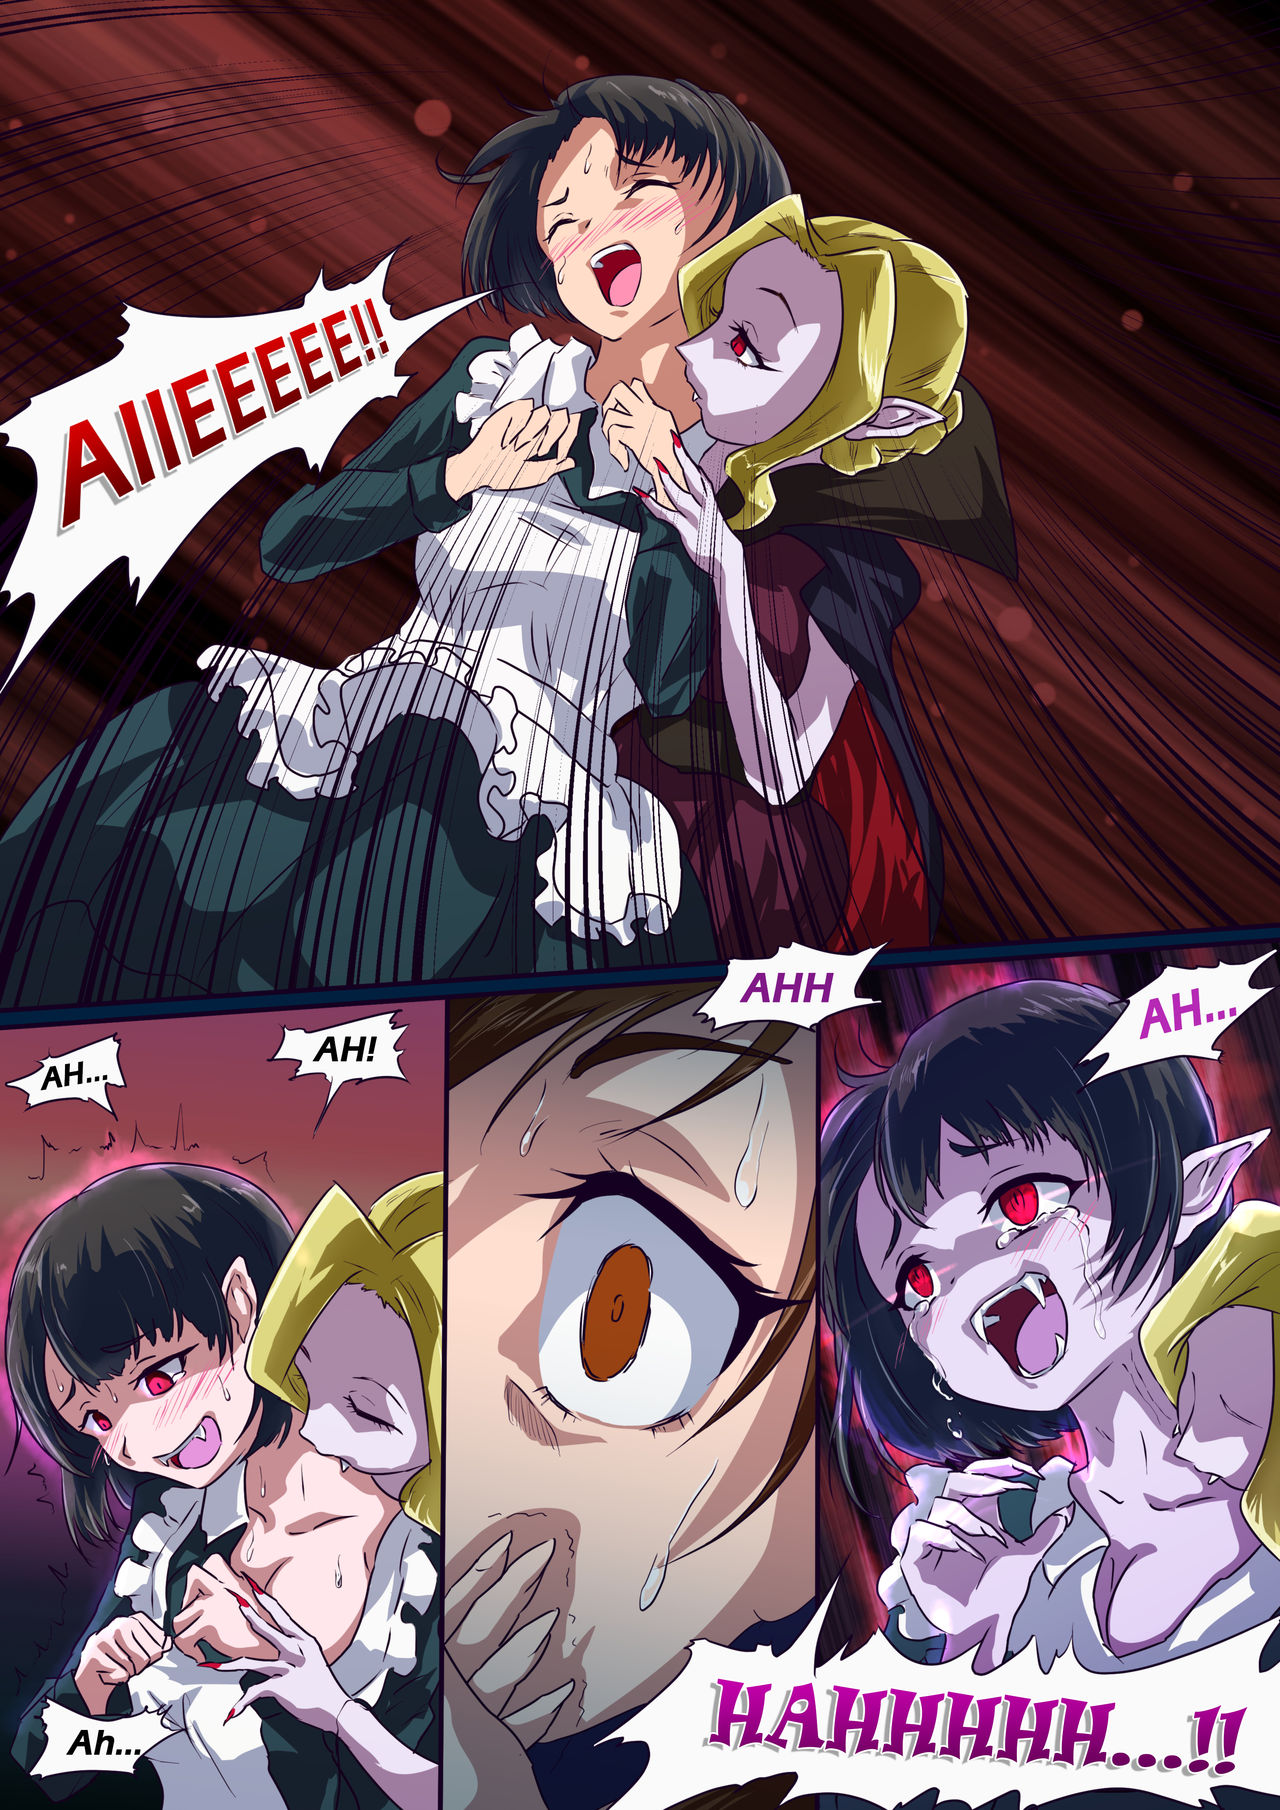 The Vampire Article 1 - Page 5 - HentaiEra